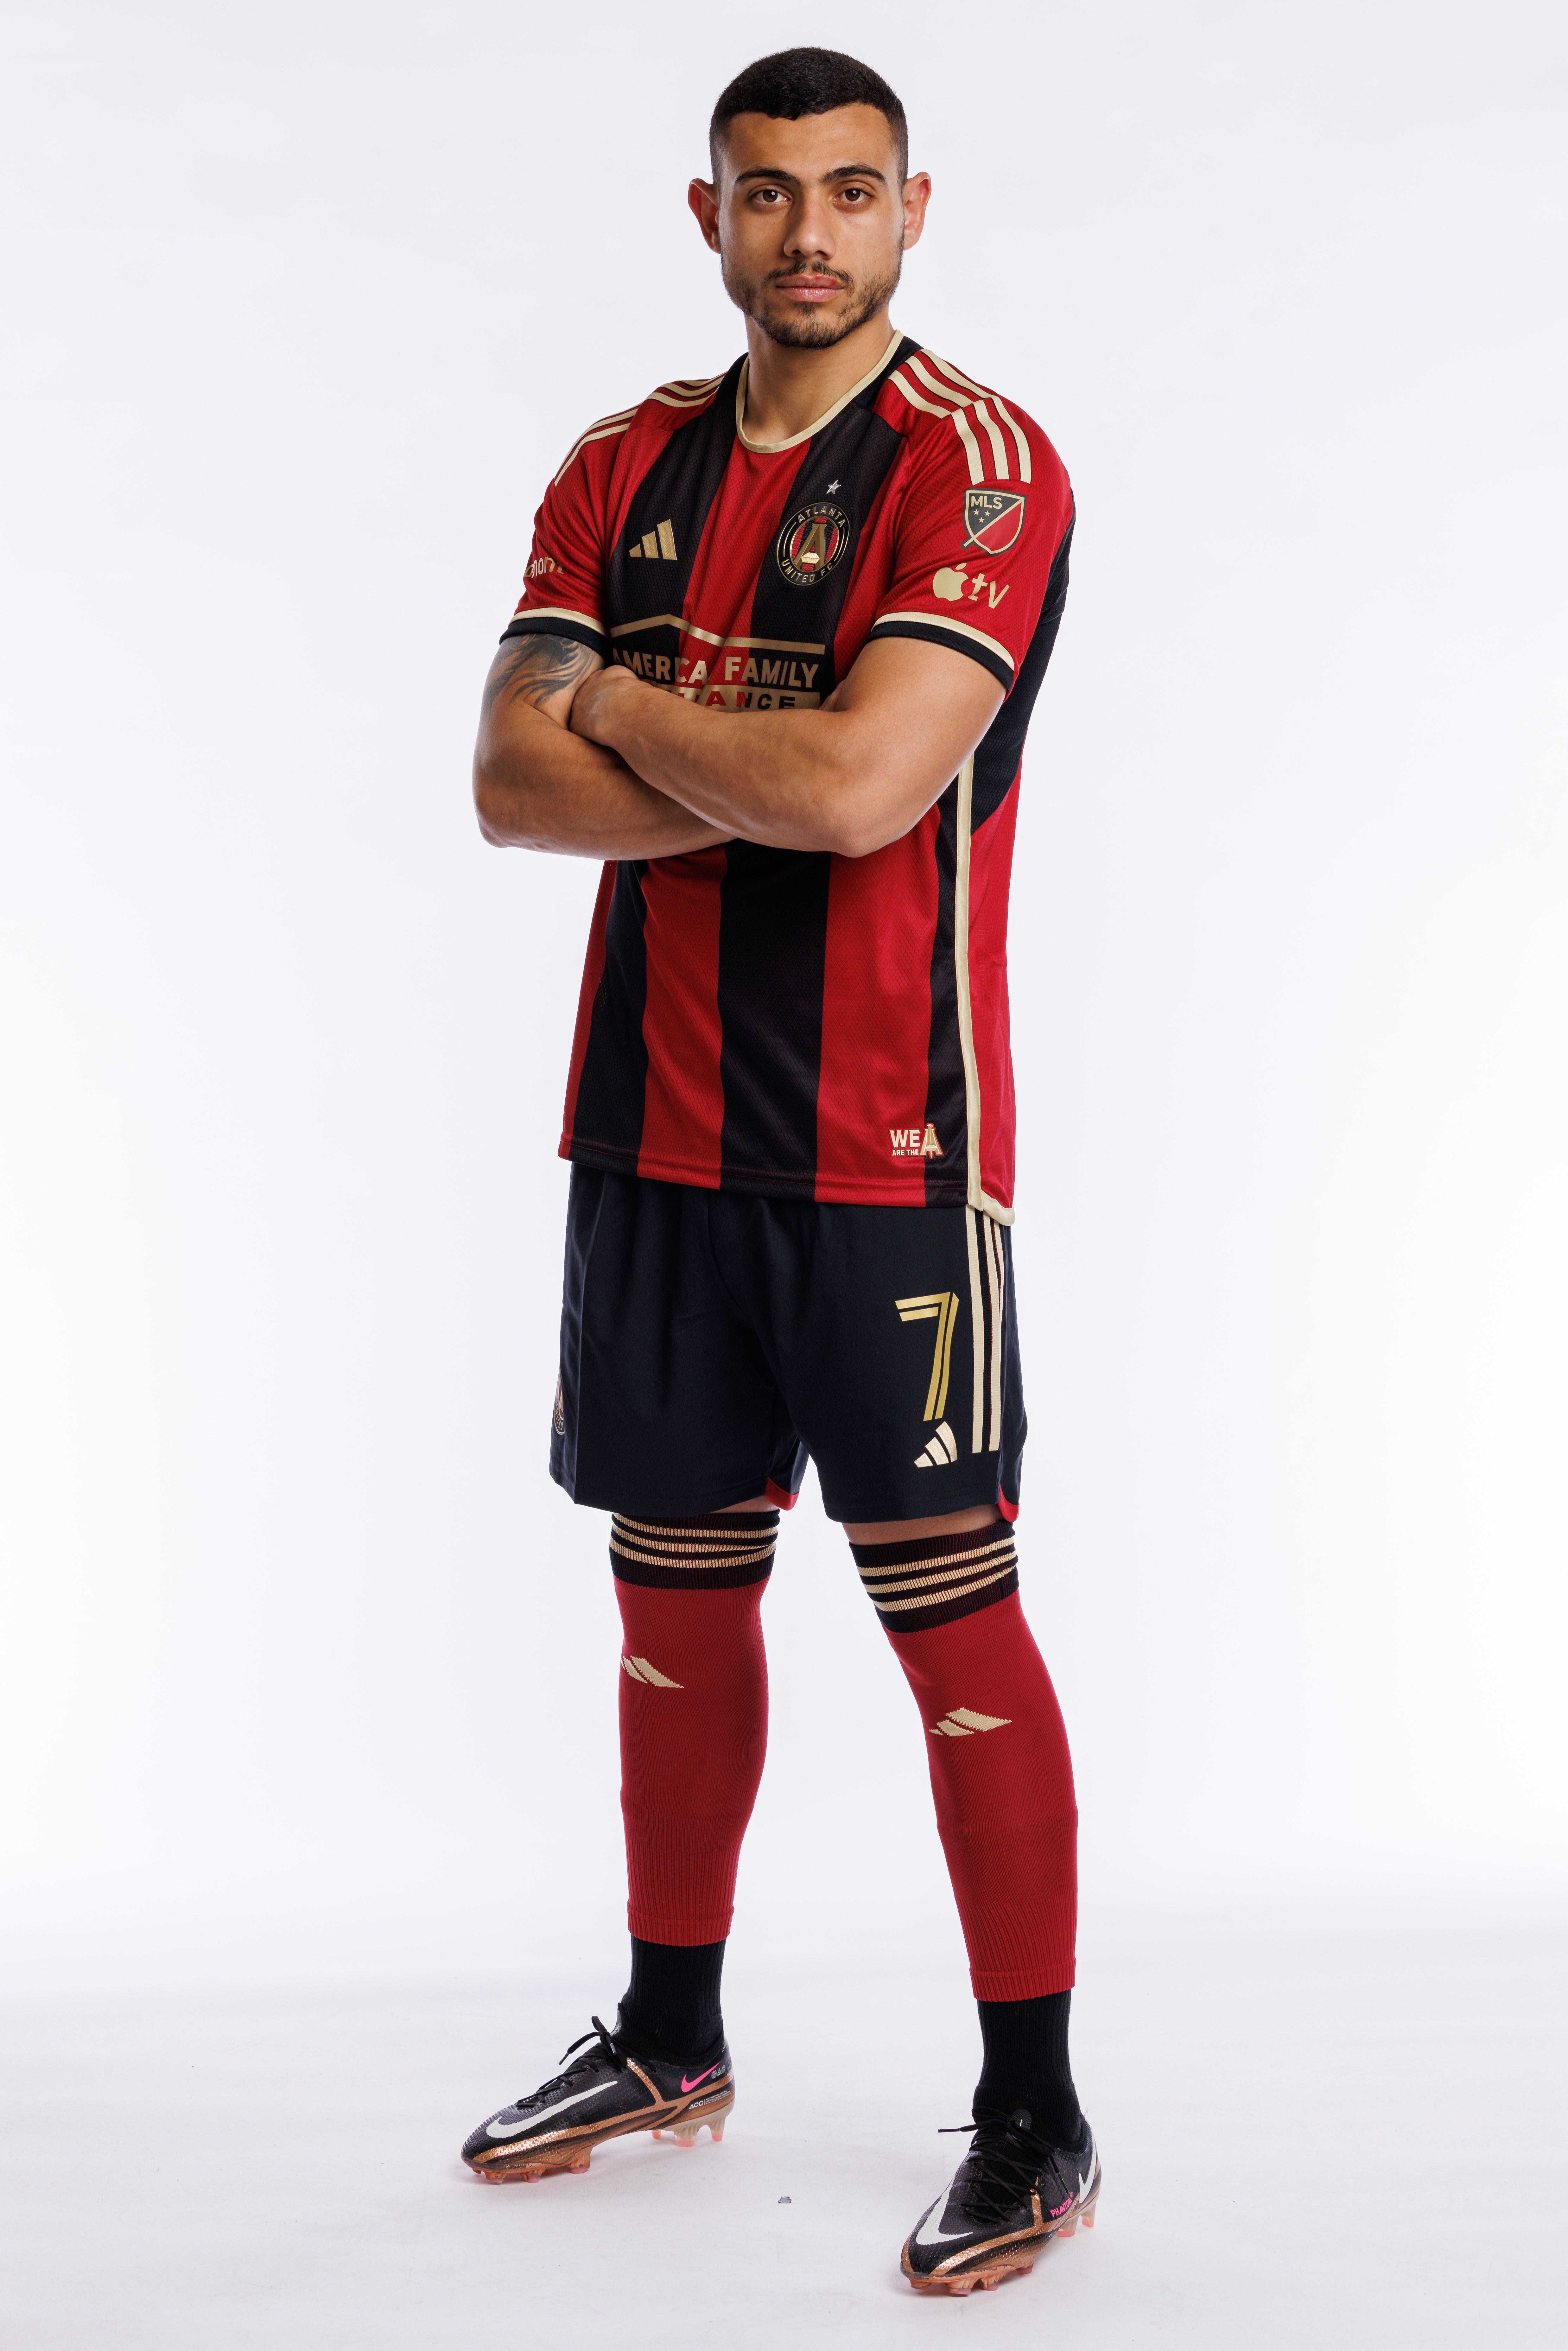 Atlanta United launches 'The 17s' Kit' as new primary kit